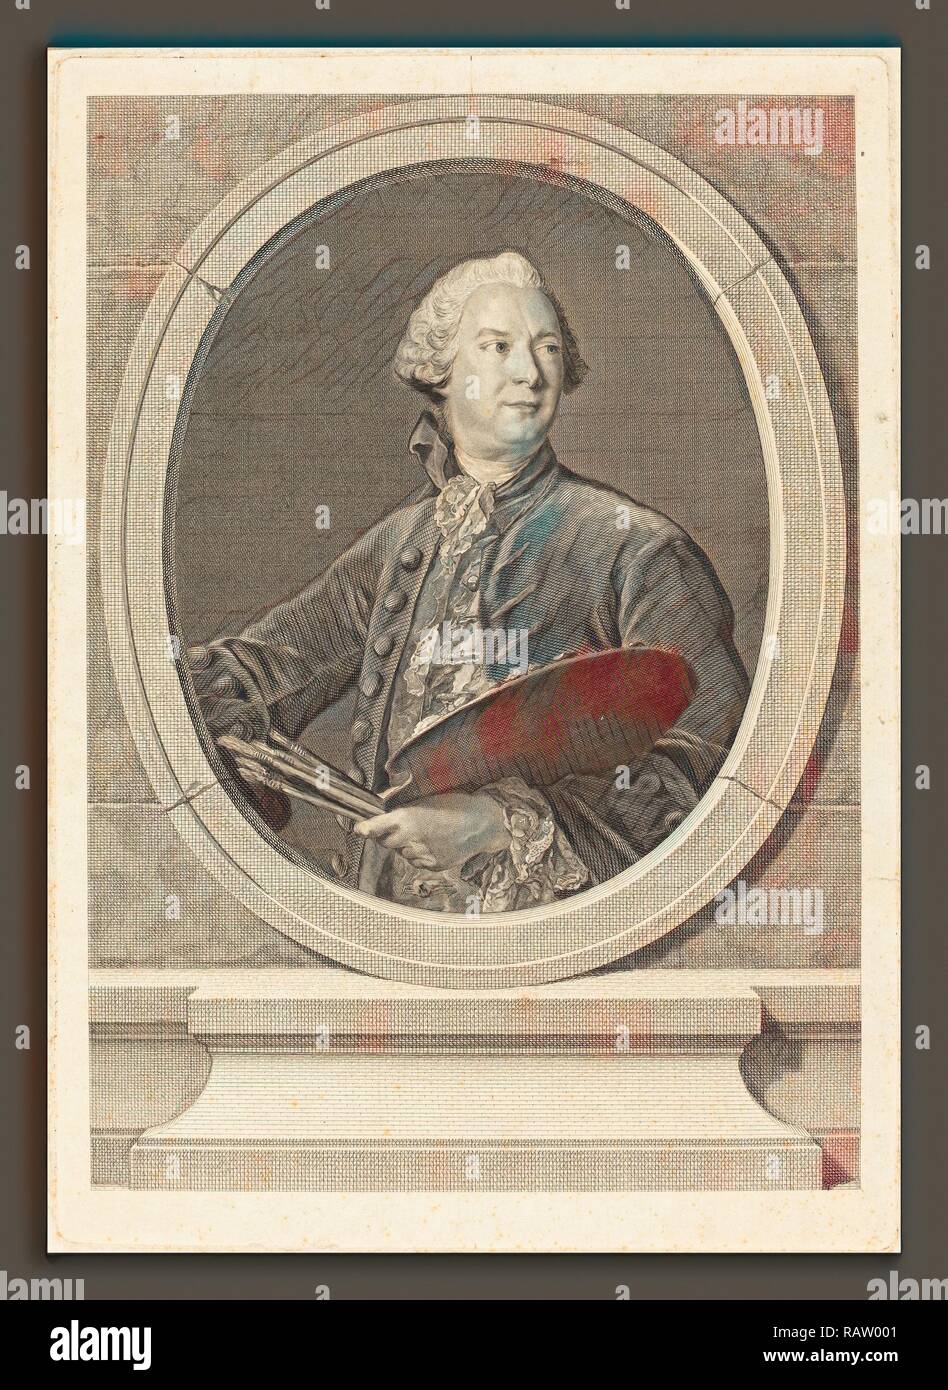 Louis-Jacques Cathelin after Jean-Marc Nattier (French, 1738-1739 - 1804), Louis Tocque, engraving on laid paper reimagined Stock Photo